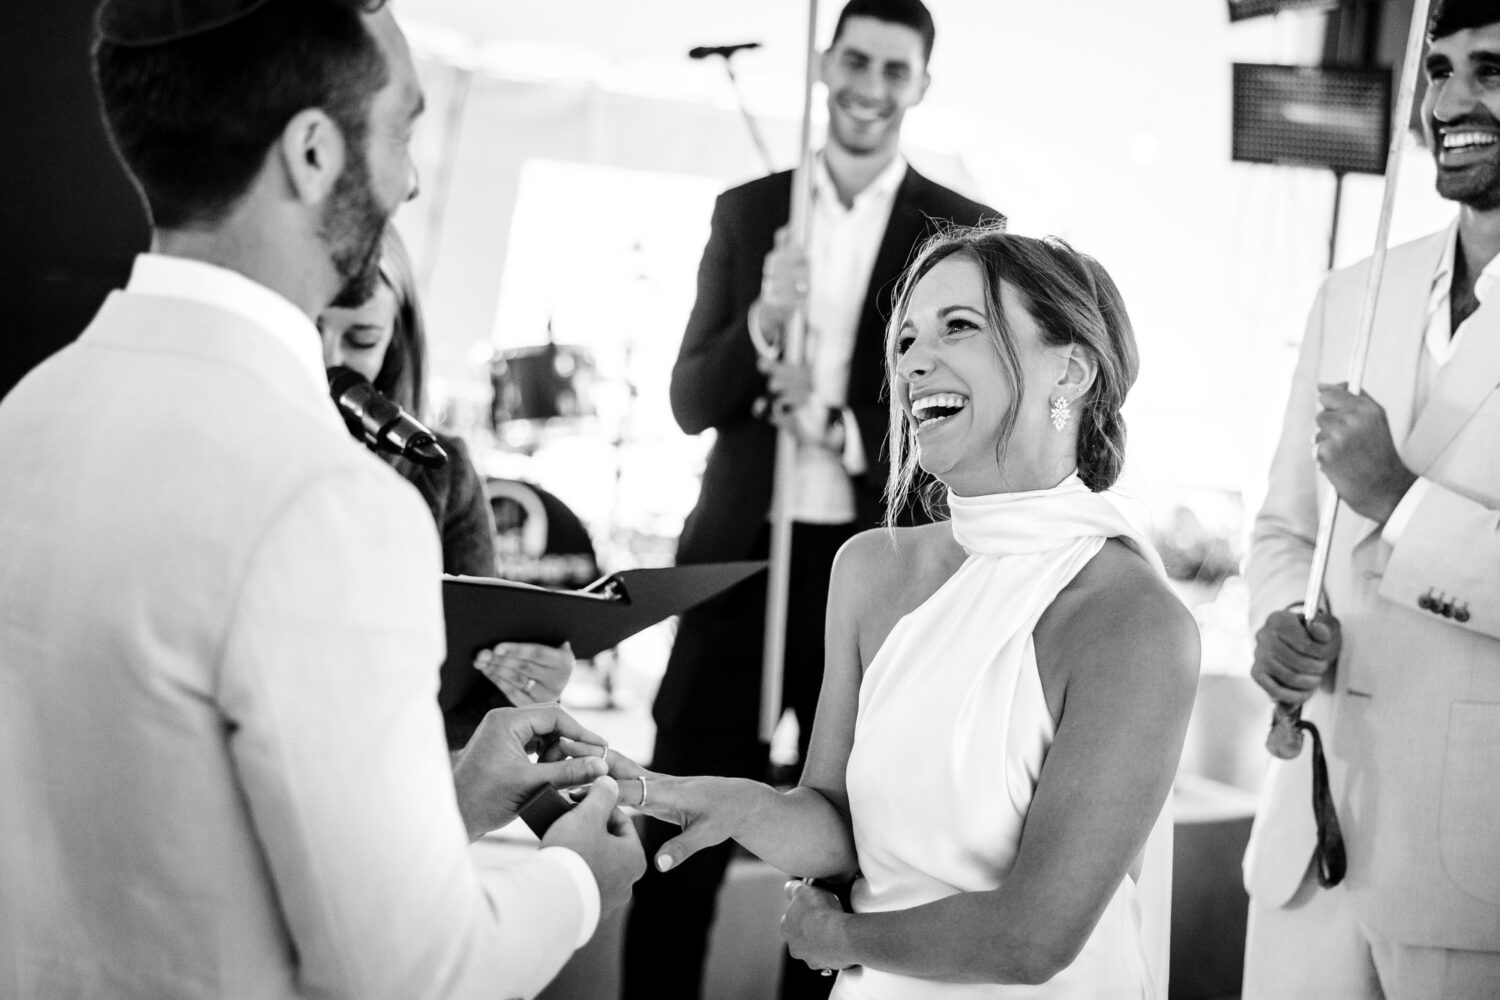 A joyful moment for a bride at her Jewish wedding in Lake Tahoe.